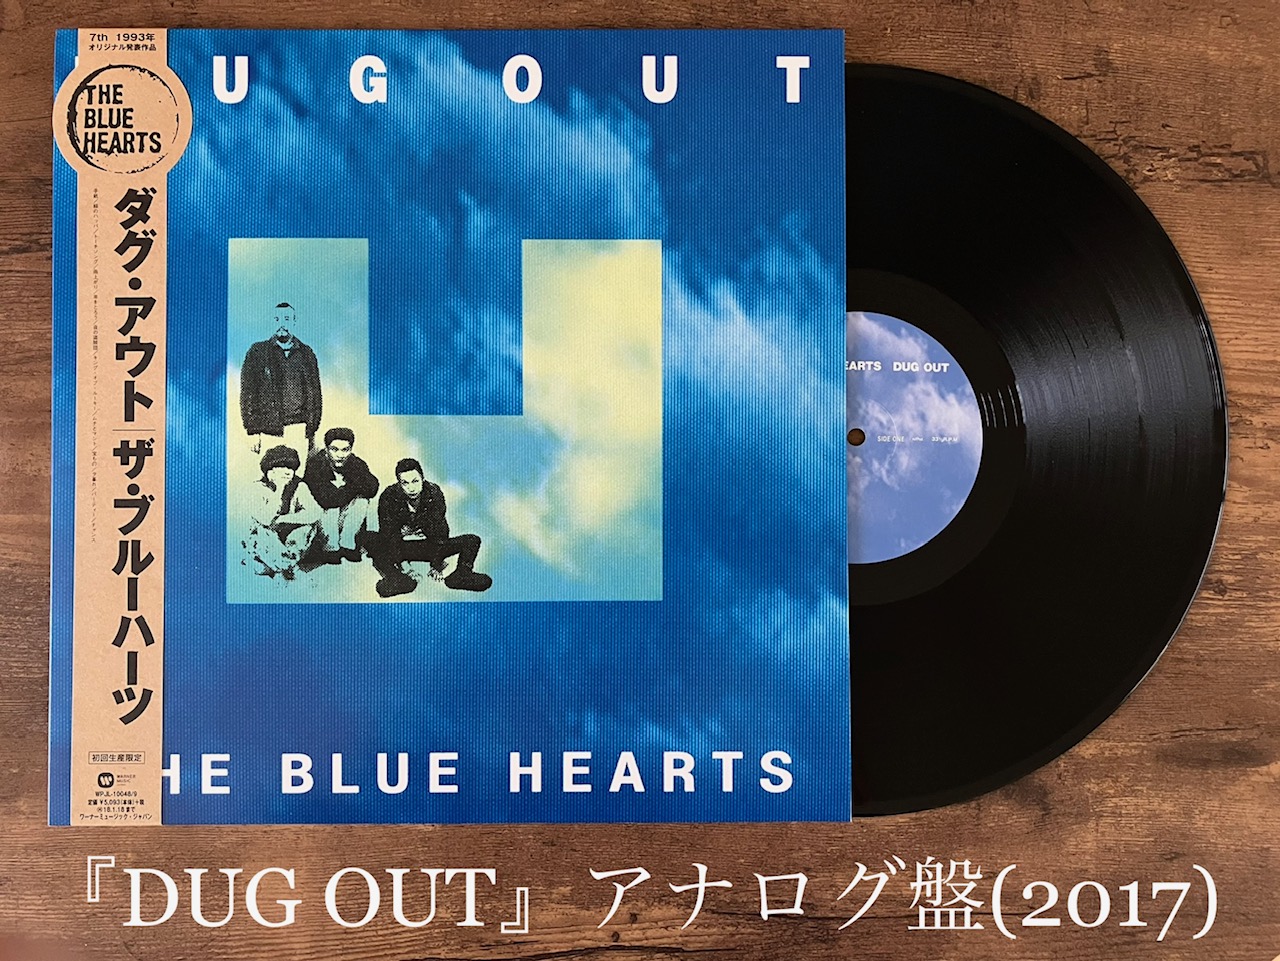 THE BLUE HEARTS / DUG OUT アナログ レコード - 邦楽